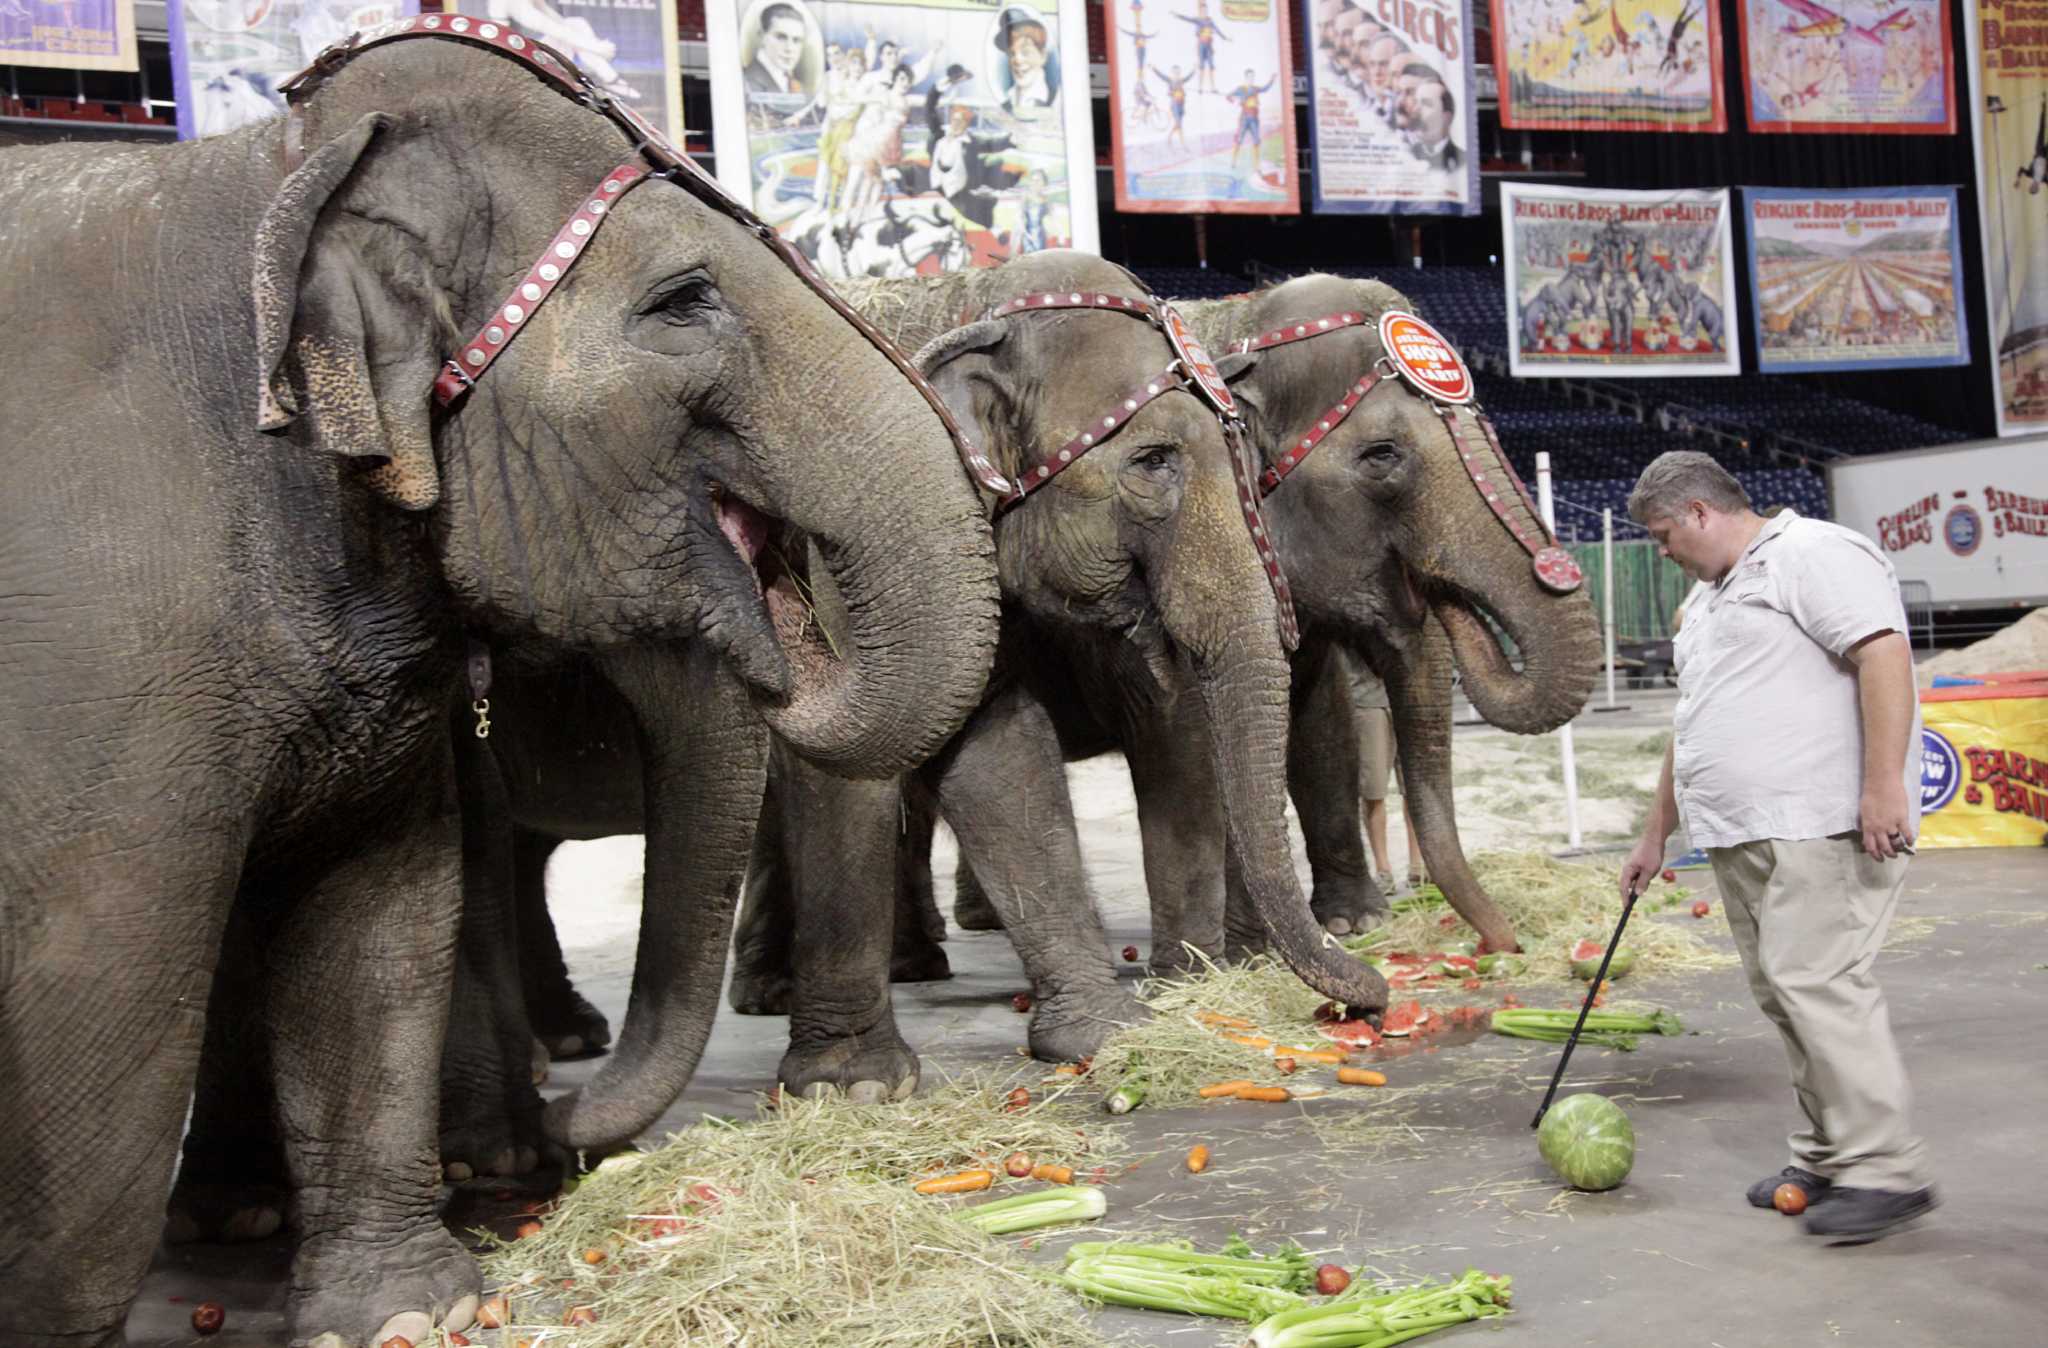 Circus elephants get the performance of a lifetime ...